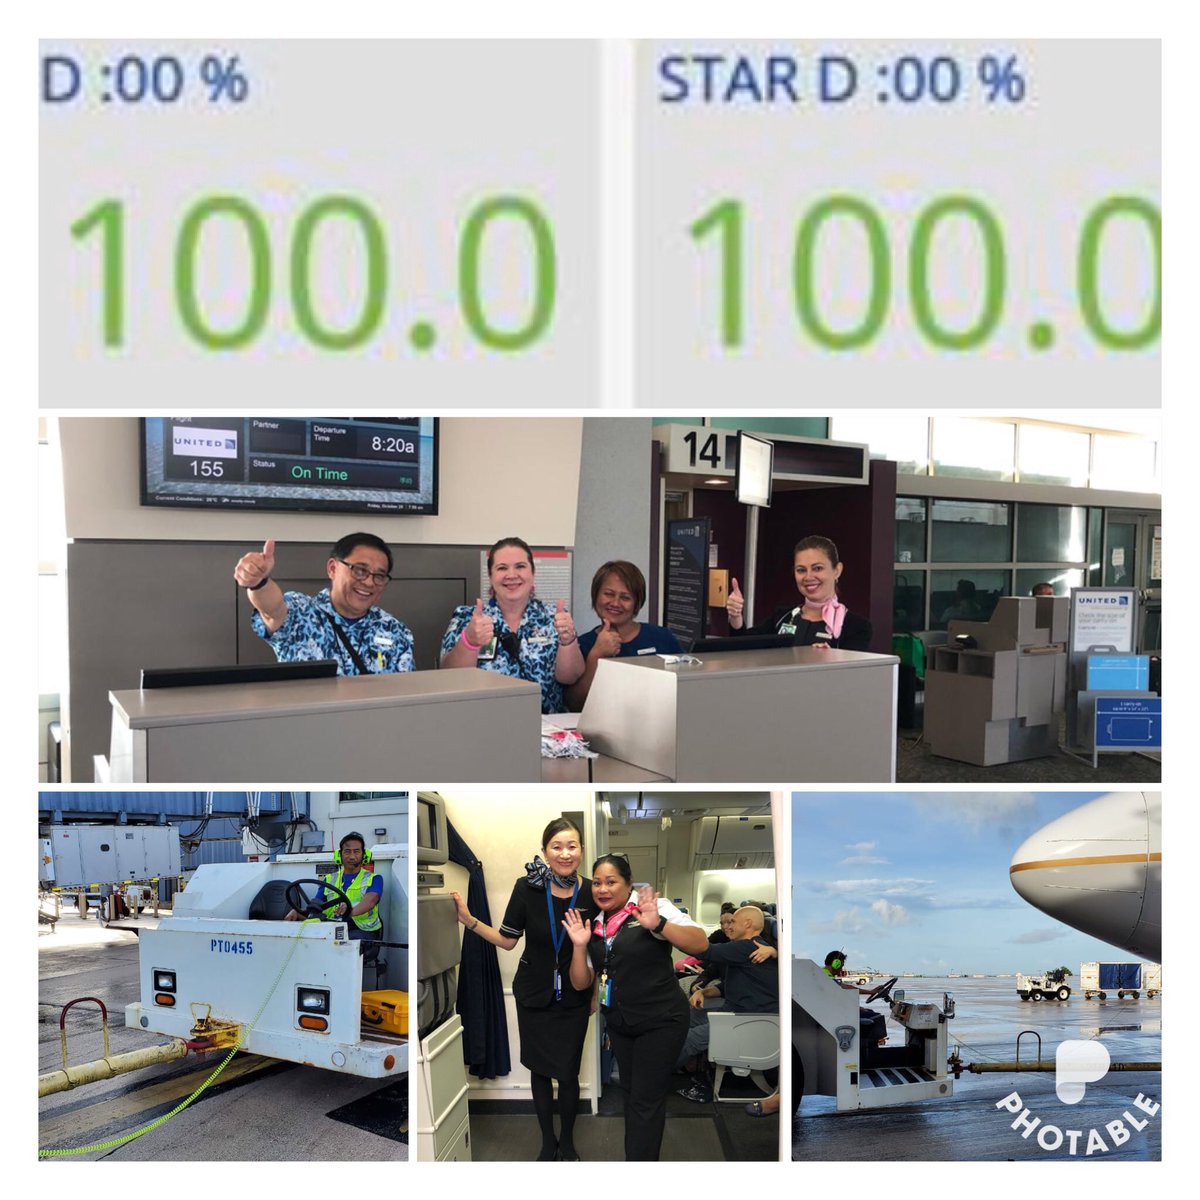 D:00 Blitz Day on Guam! Kicking off the operation with 100% D:00 and STAR performance with core4 at its best! @weareunited @JMRoitman @DJKinzelman @sam_shinohara